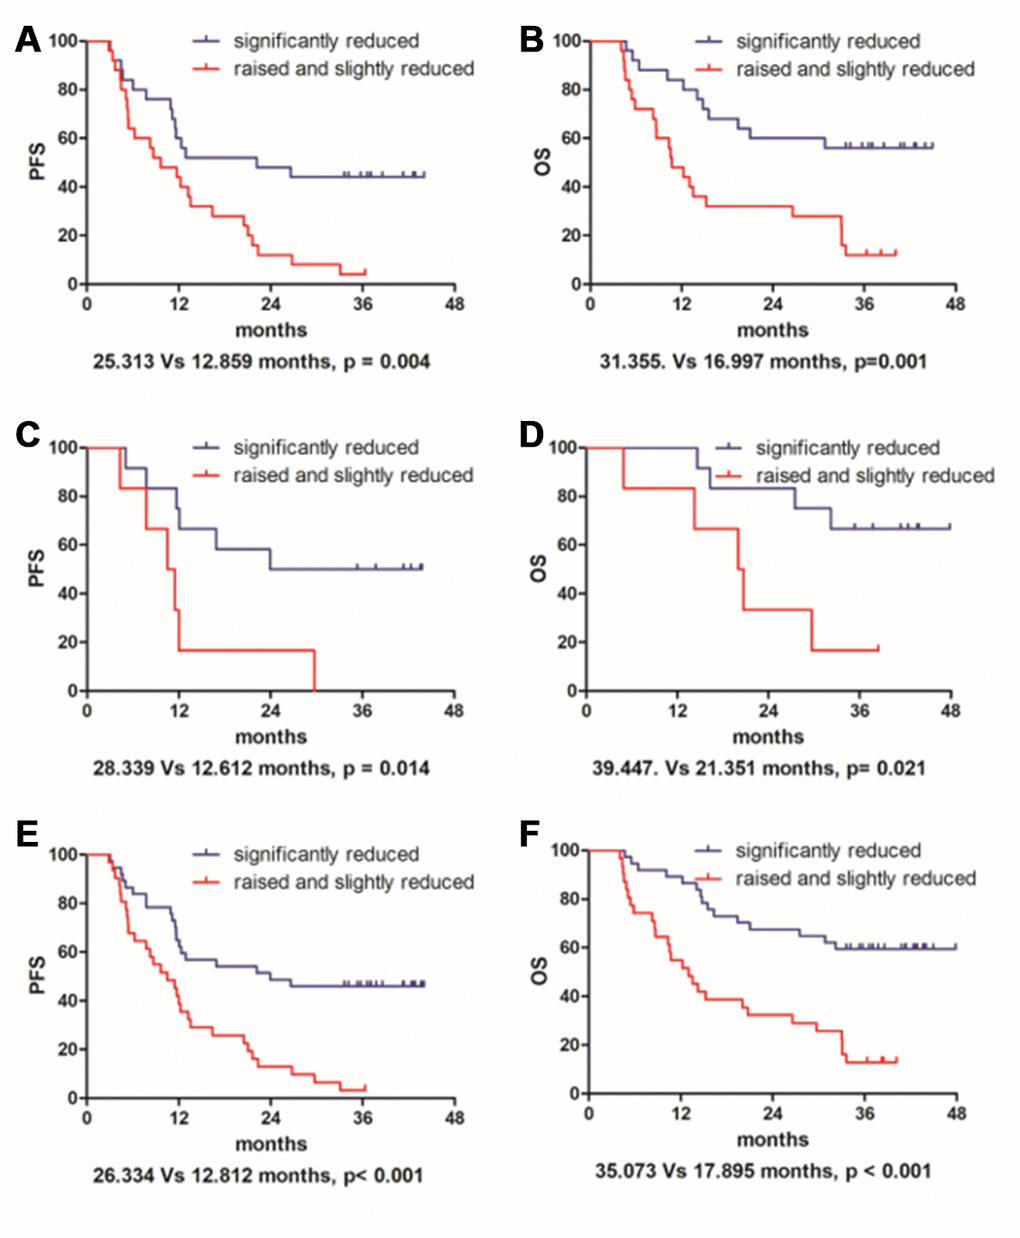 Change rate in serum indicated that patients with significantly reduced PDGF-BB had a much improved prognosis than the raised and slightly reduced group in both progression-free survival (A, C and E) and overall survival (B, D and F) either for the 50 patients that received radical radiotherapy (A and B) or for the remaining 18 patients that received neoadjuvant radiotherapy and surgery (C and D). In addition, regarding the entire 68 cases taken together (E and F), it also has statistical significance.